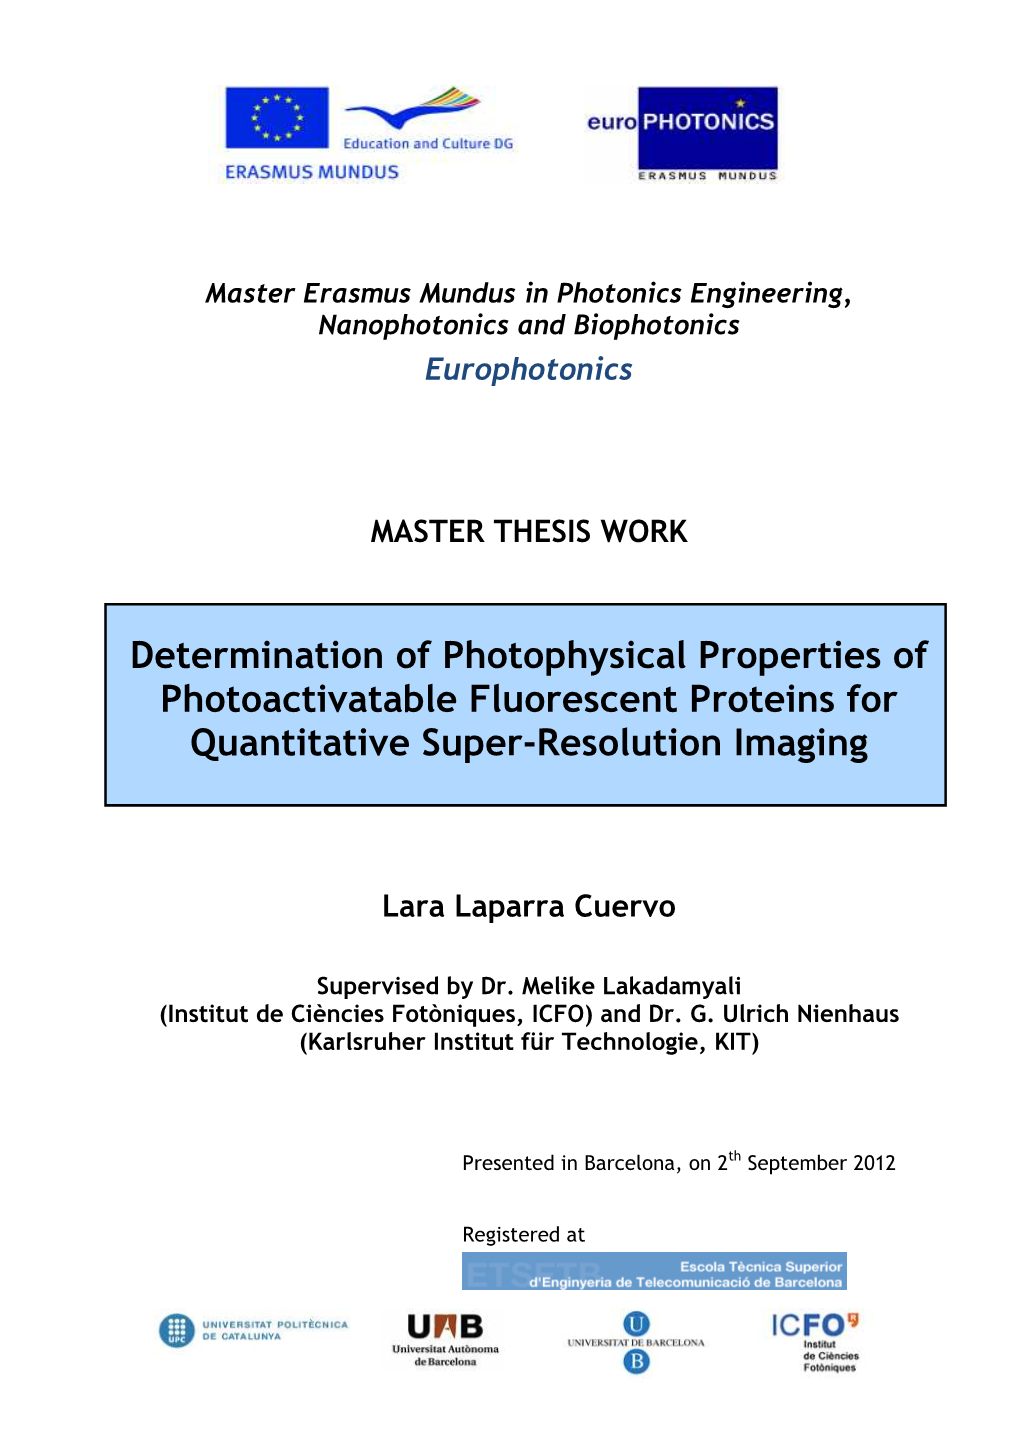 Determination of Photophysical Properties of Photoactivatable Fluorescent Proteins for Quantitative Super-Resolution Imaging